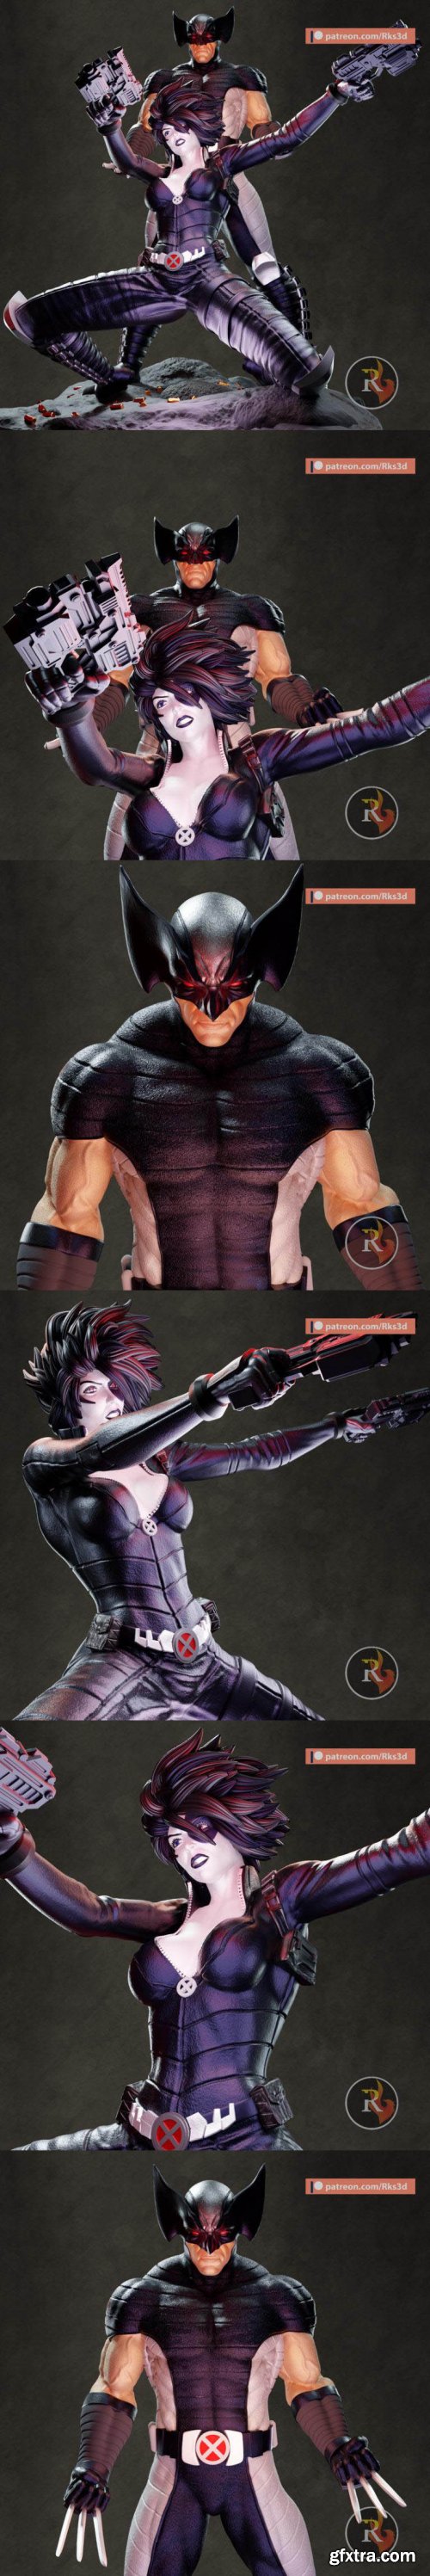 Wolverine and Domino – Marvel